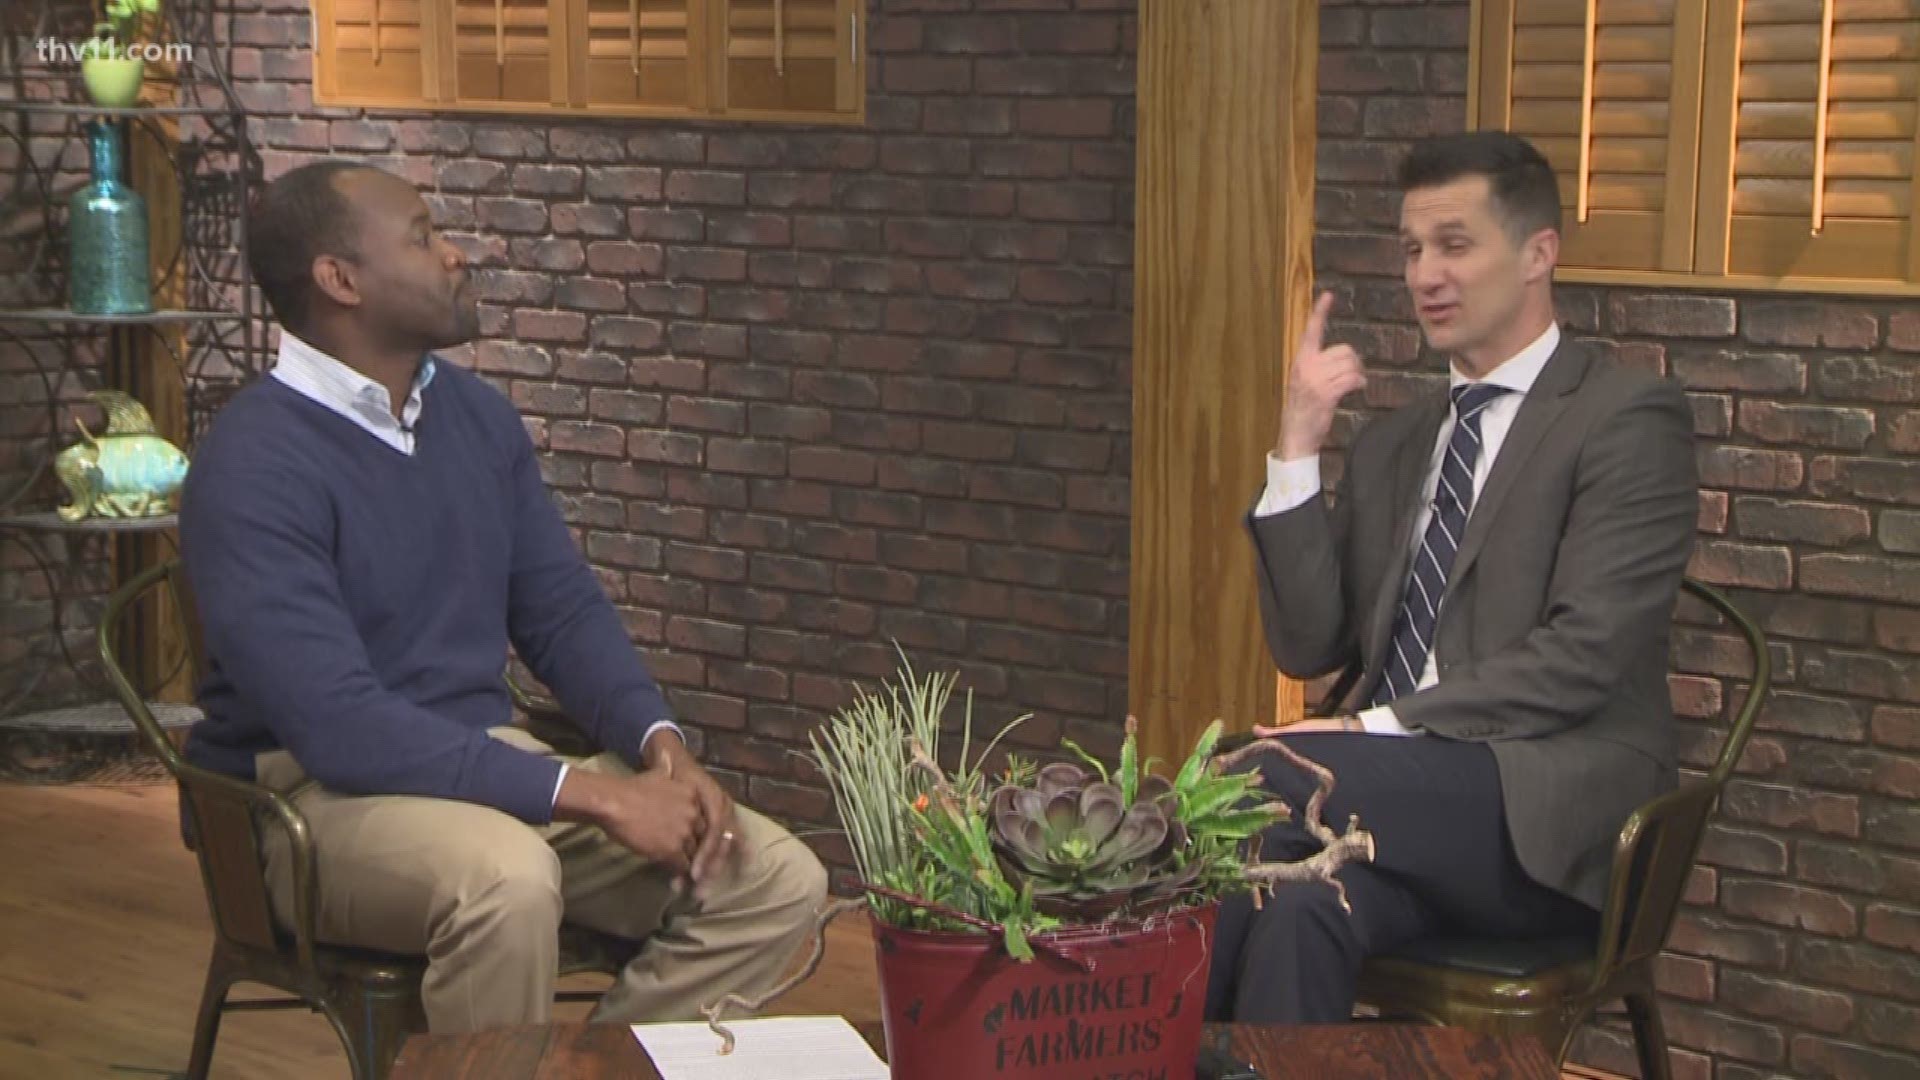 Do you find yourself avoiding conflicts? Charlie Simpson with the Arkansas Relationship Counseling Center joined THV11 This Morning to help you avoid sweeping problems under the rug.